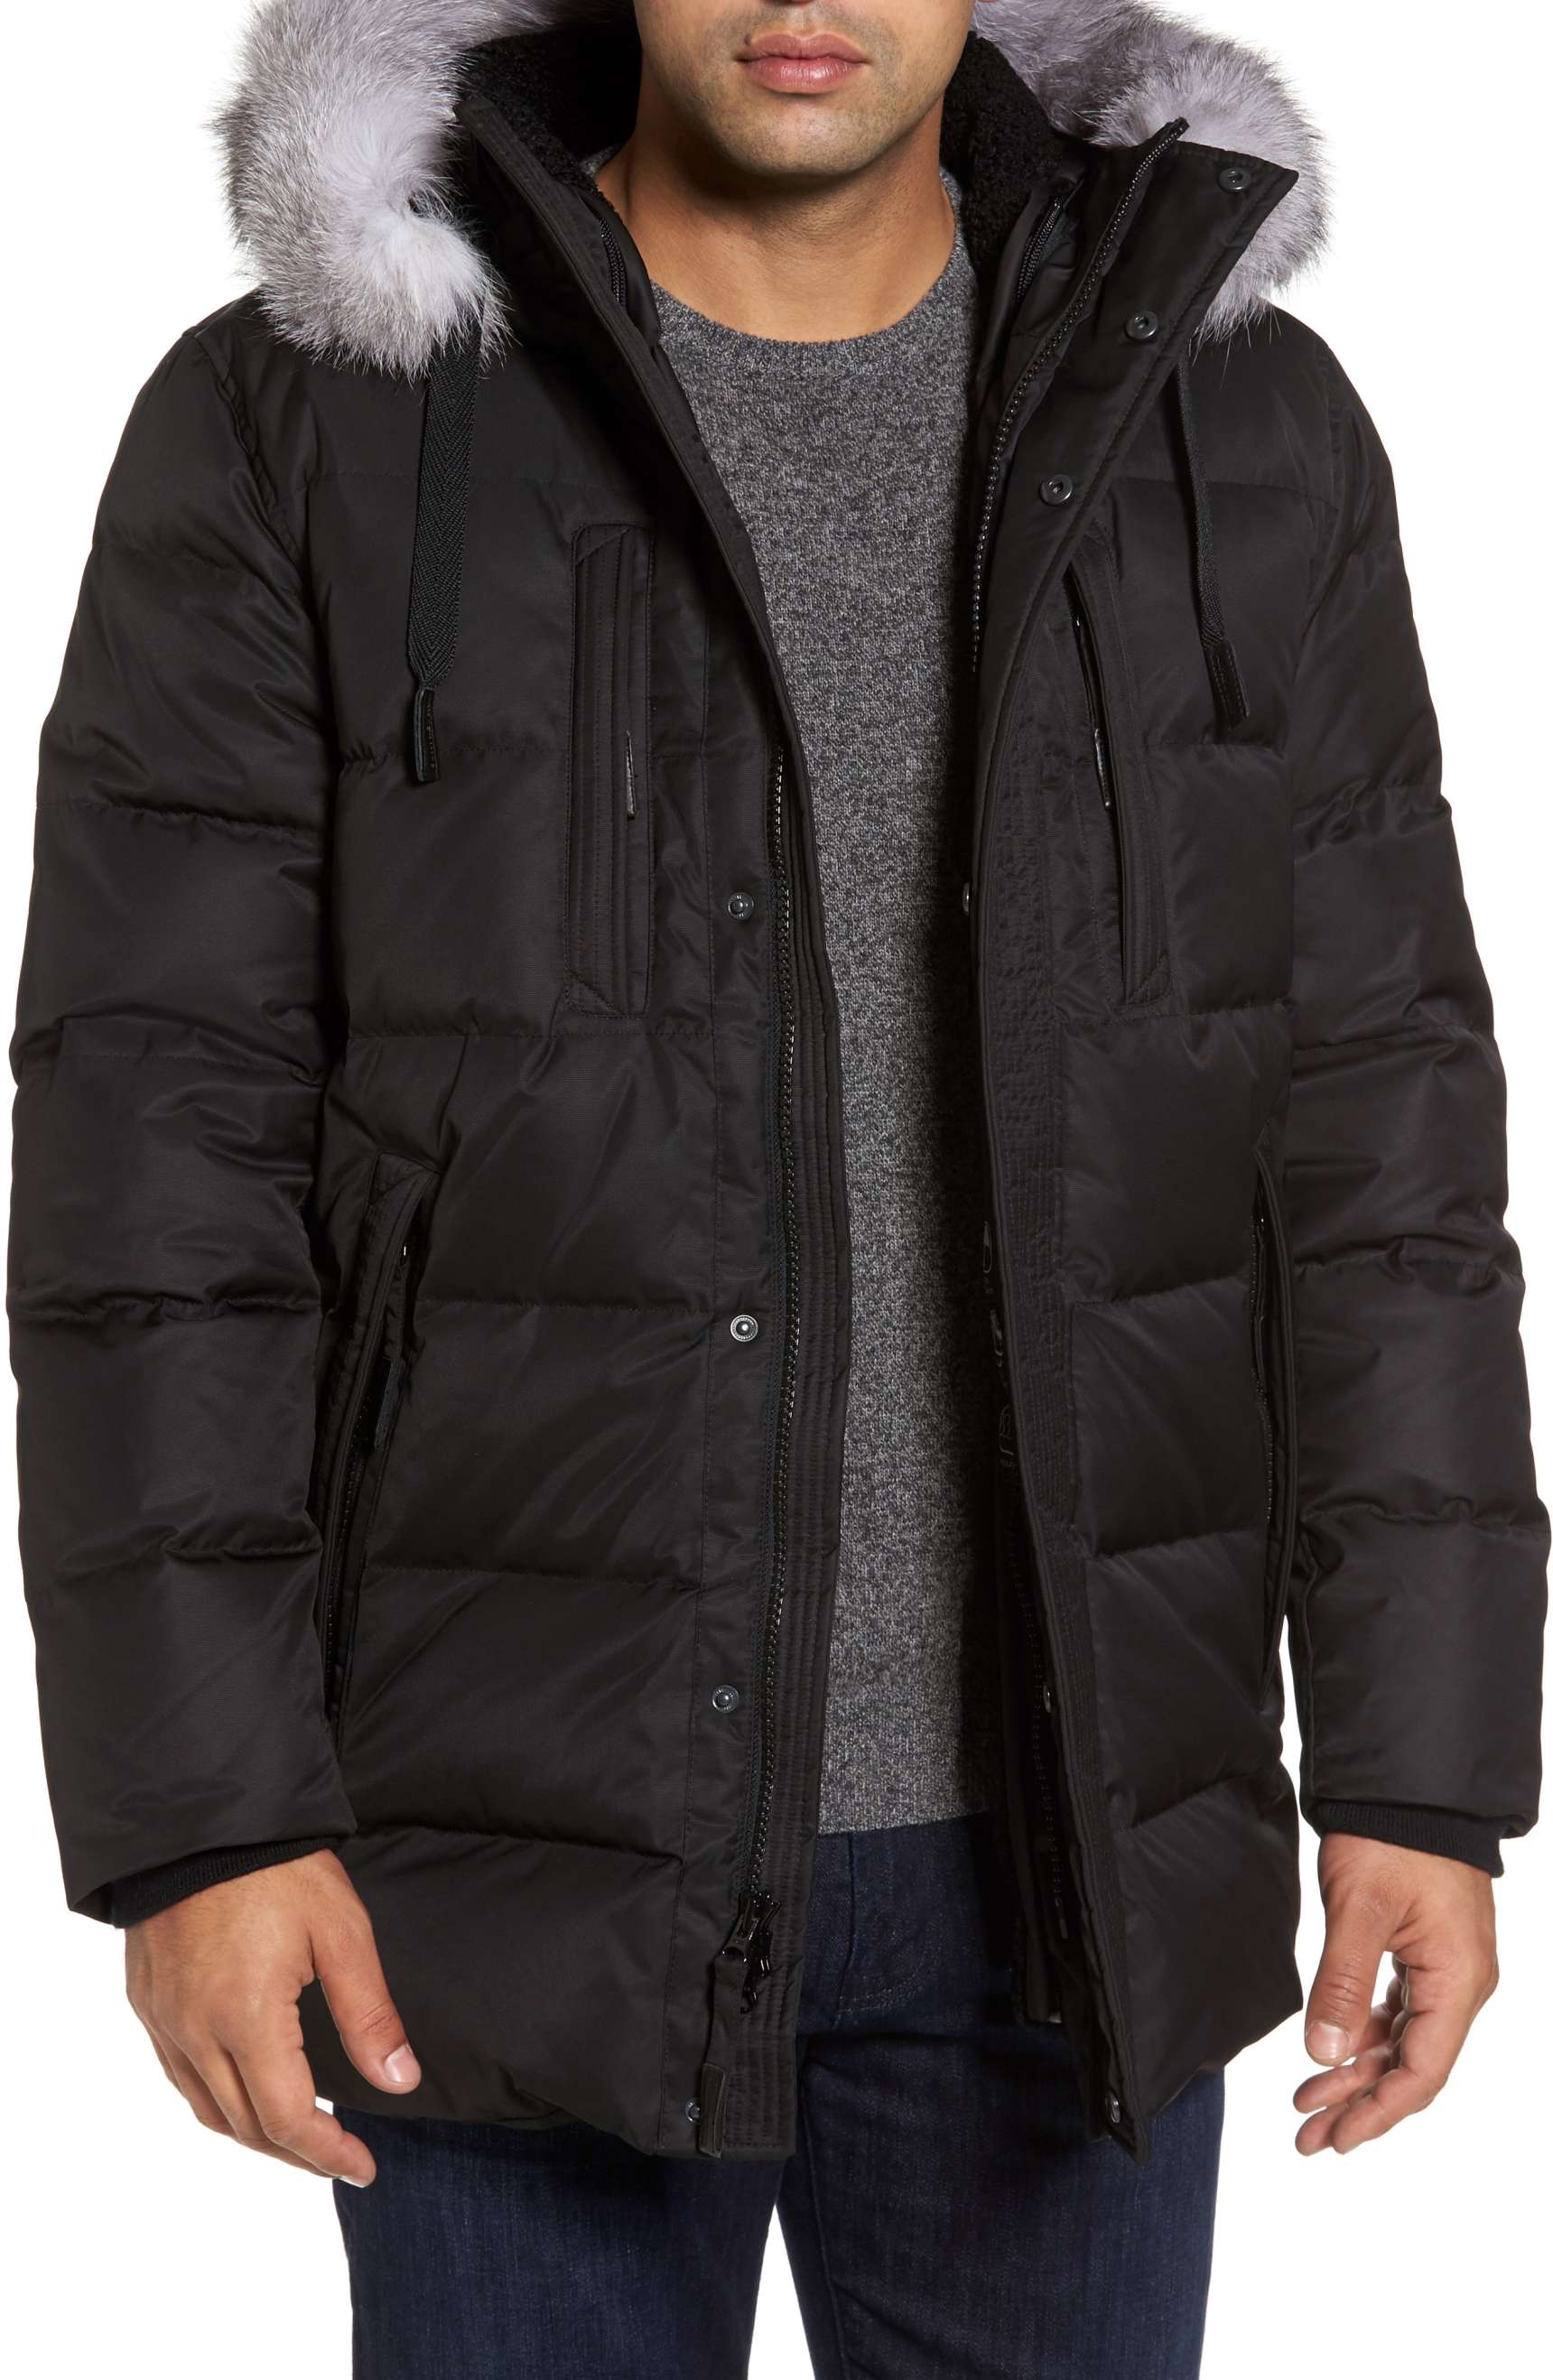 10 Winter Jackets You Need to Survive the Cold - Reviewed and ...